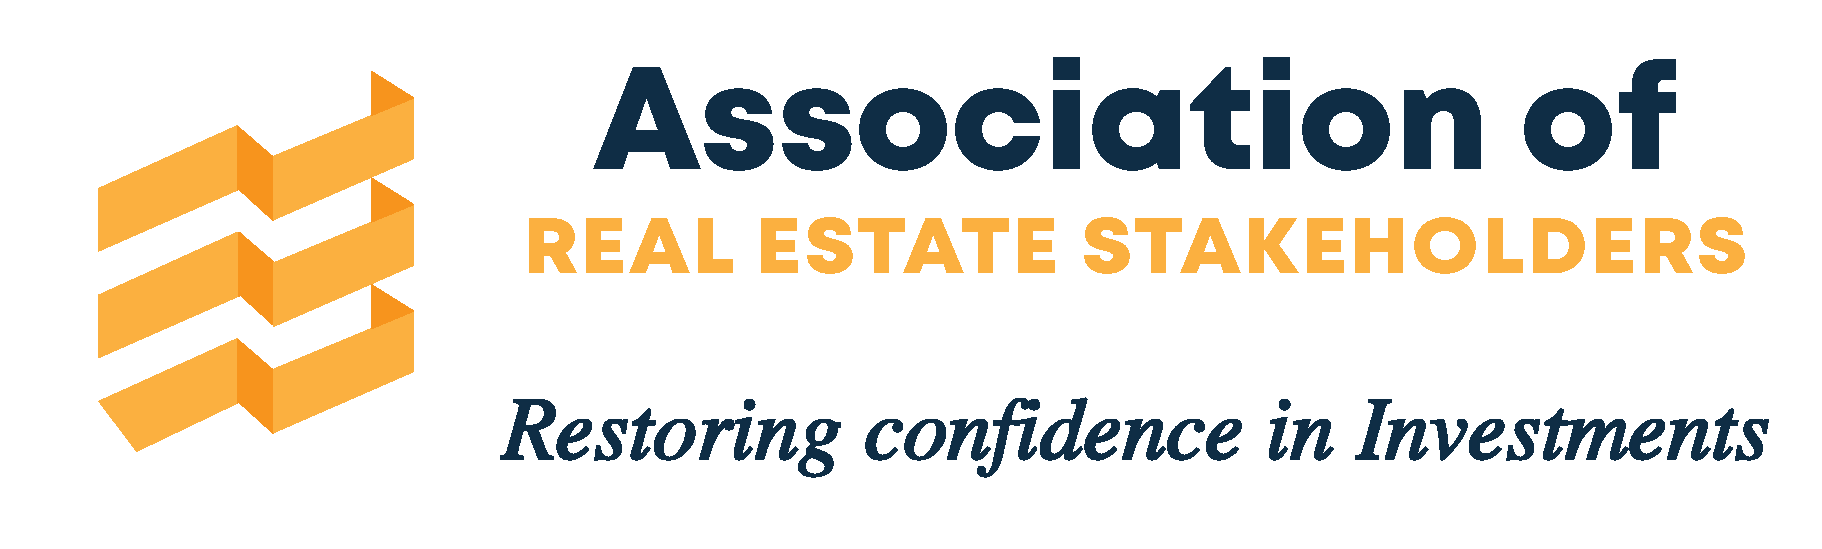 ASSOCIATION OF REAL ESTATE STAKEHOLDERS